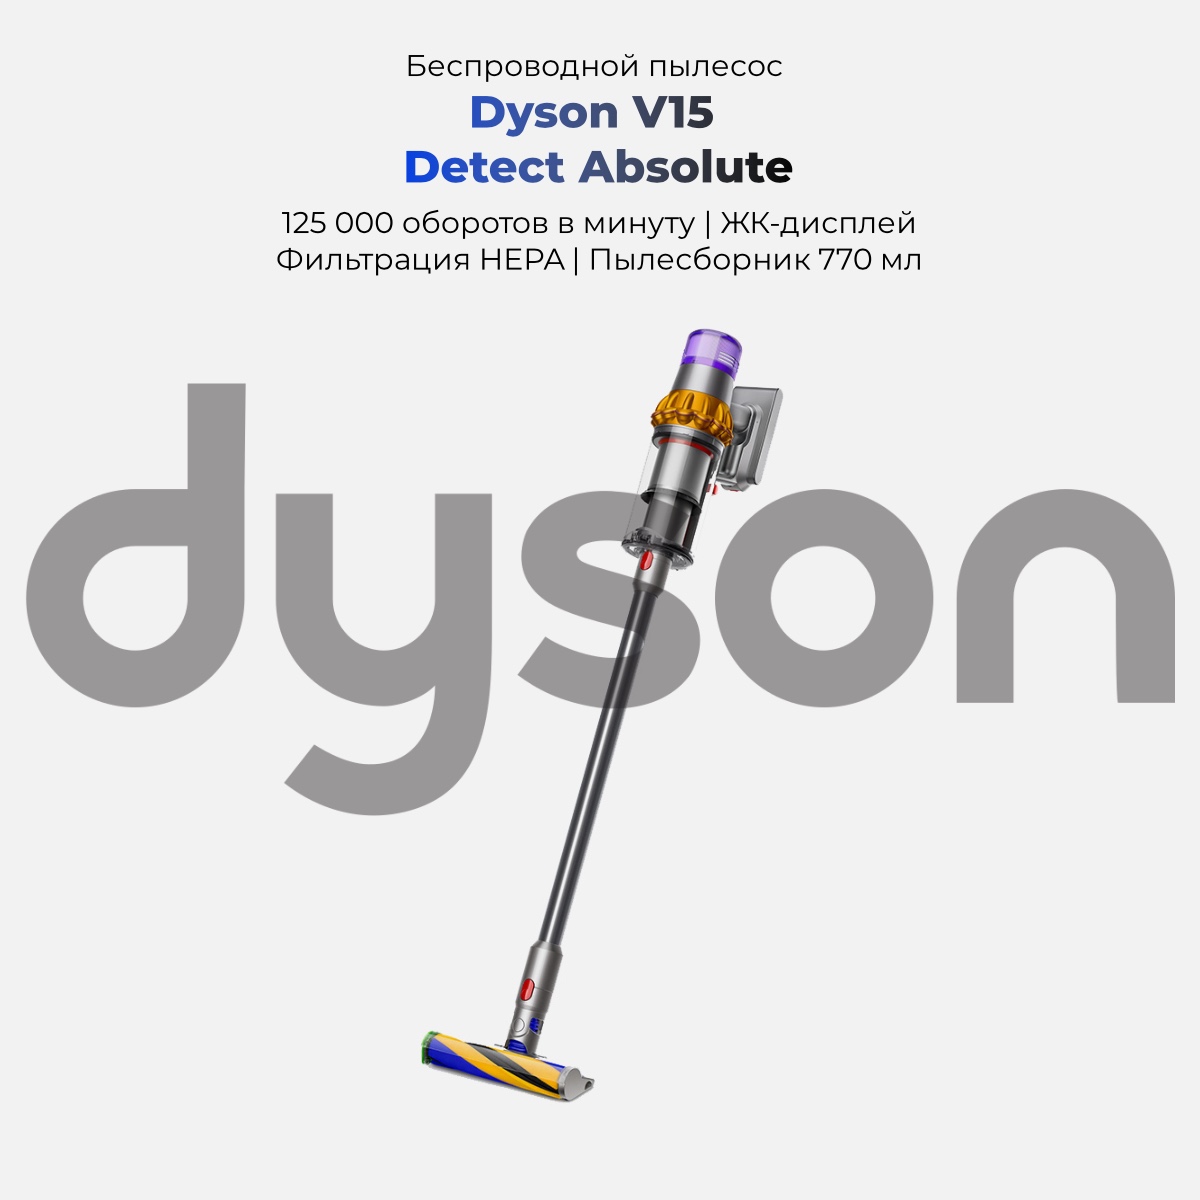 Dyson-V15-Detect-Absolute-01